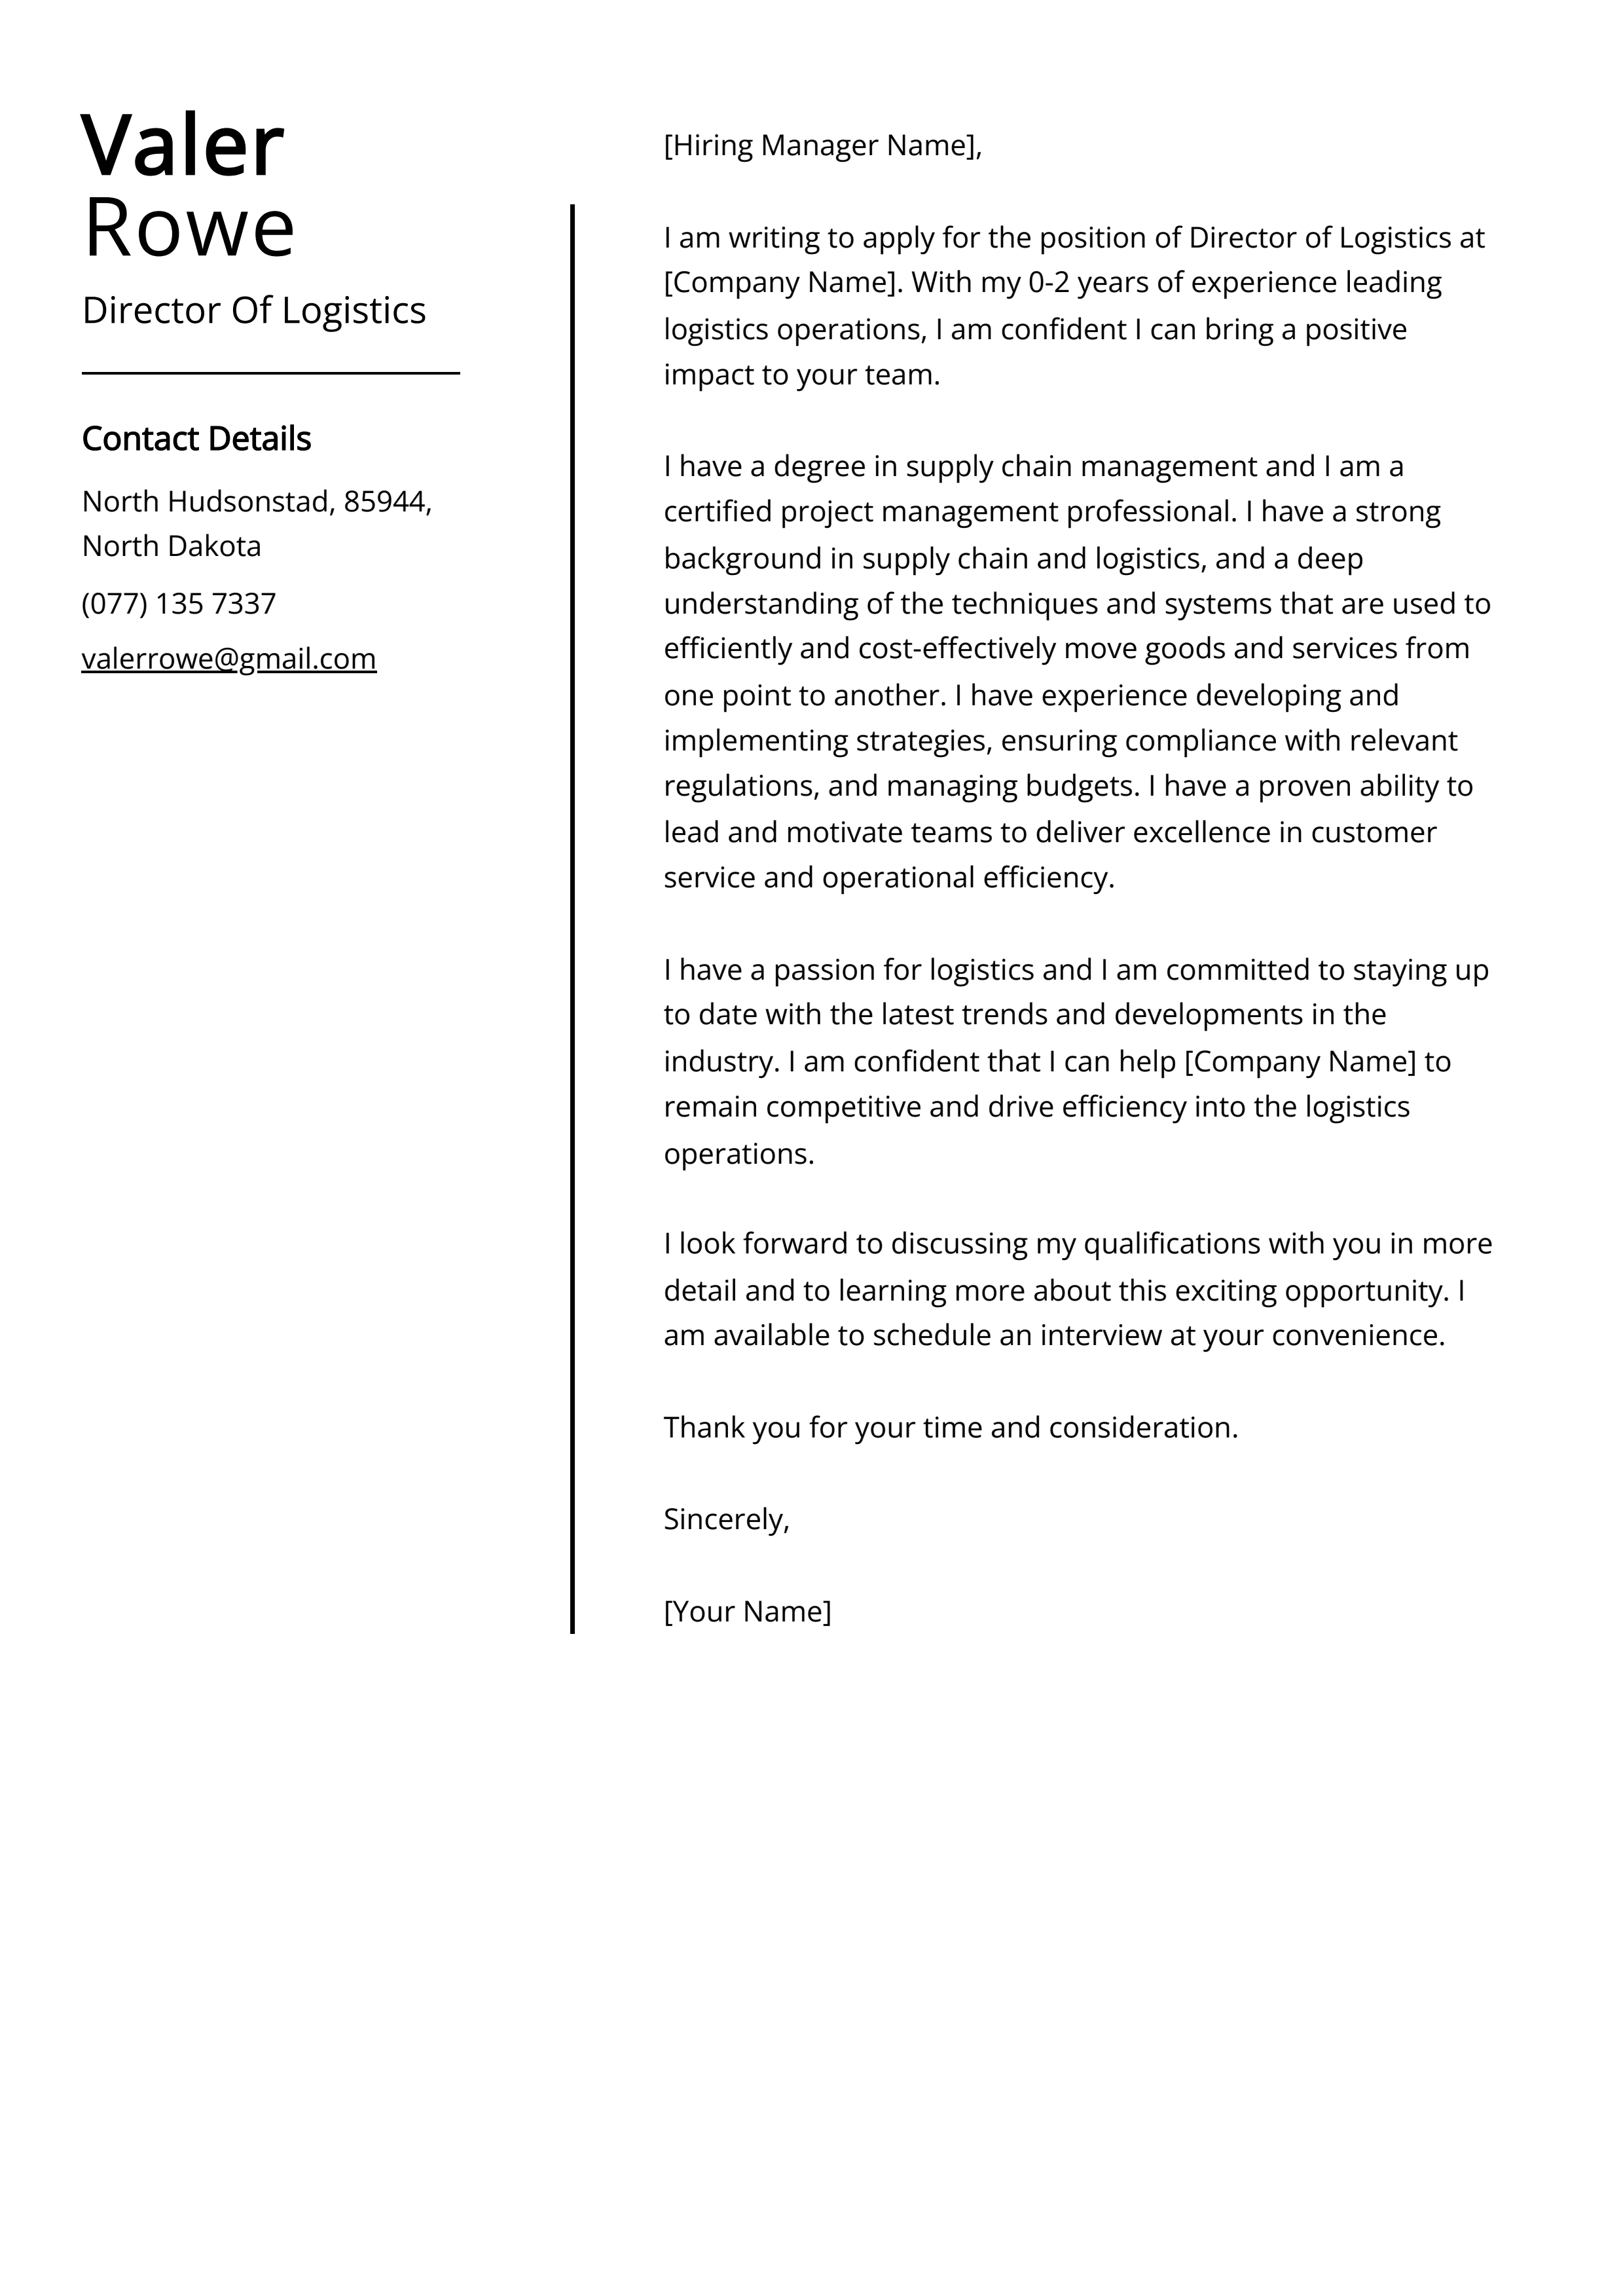 Director Of Logistics Cover Letter Example